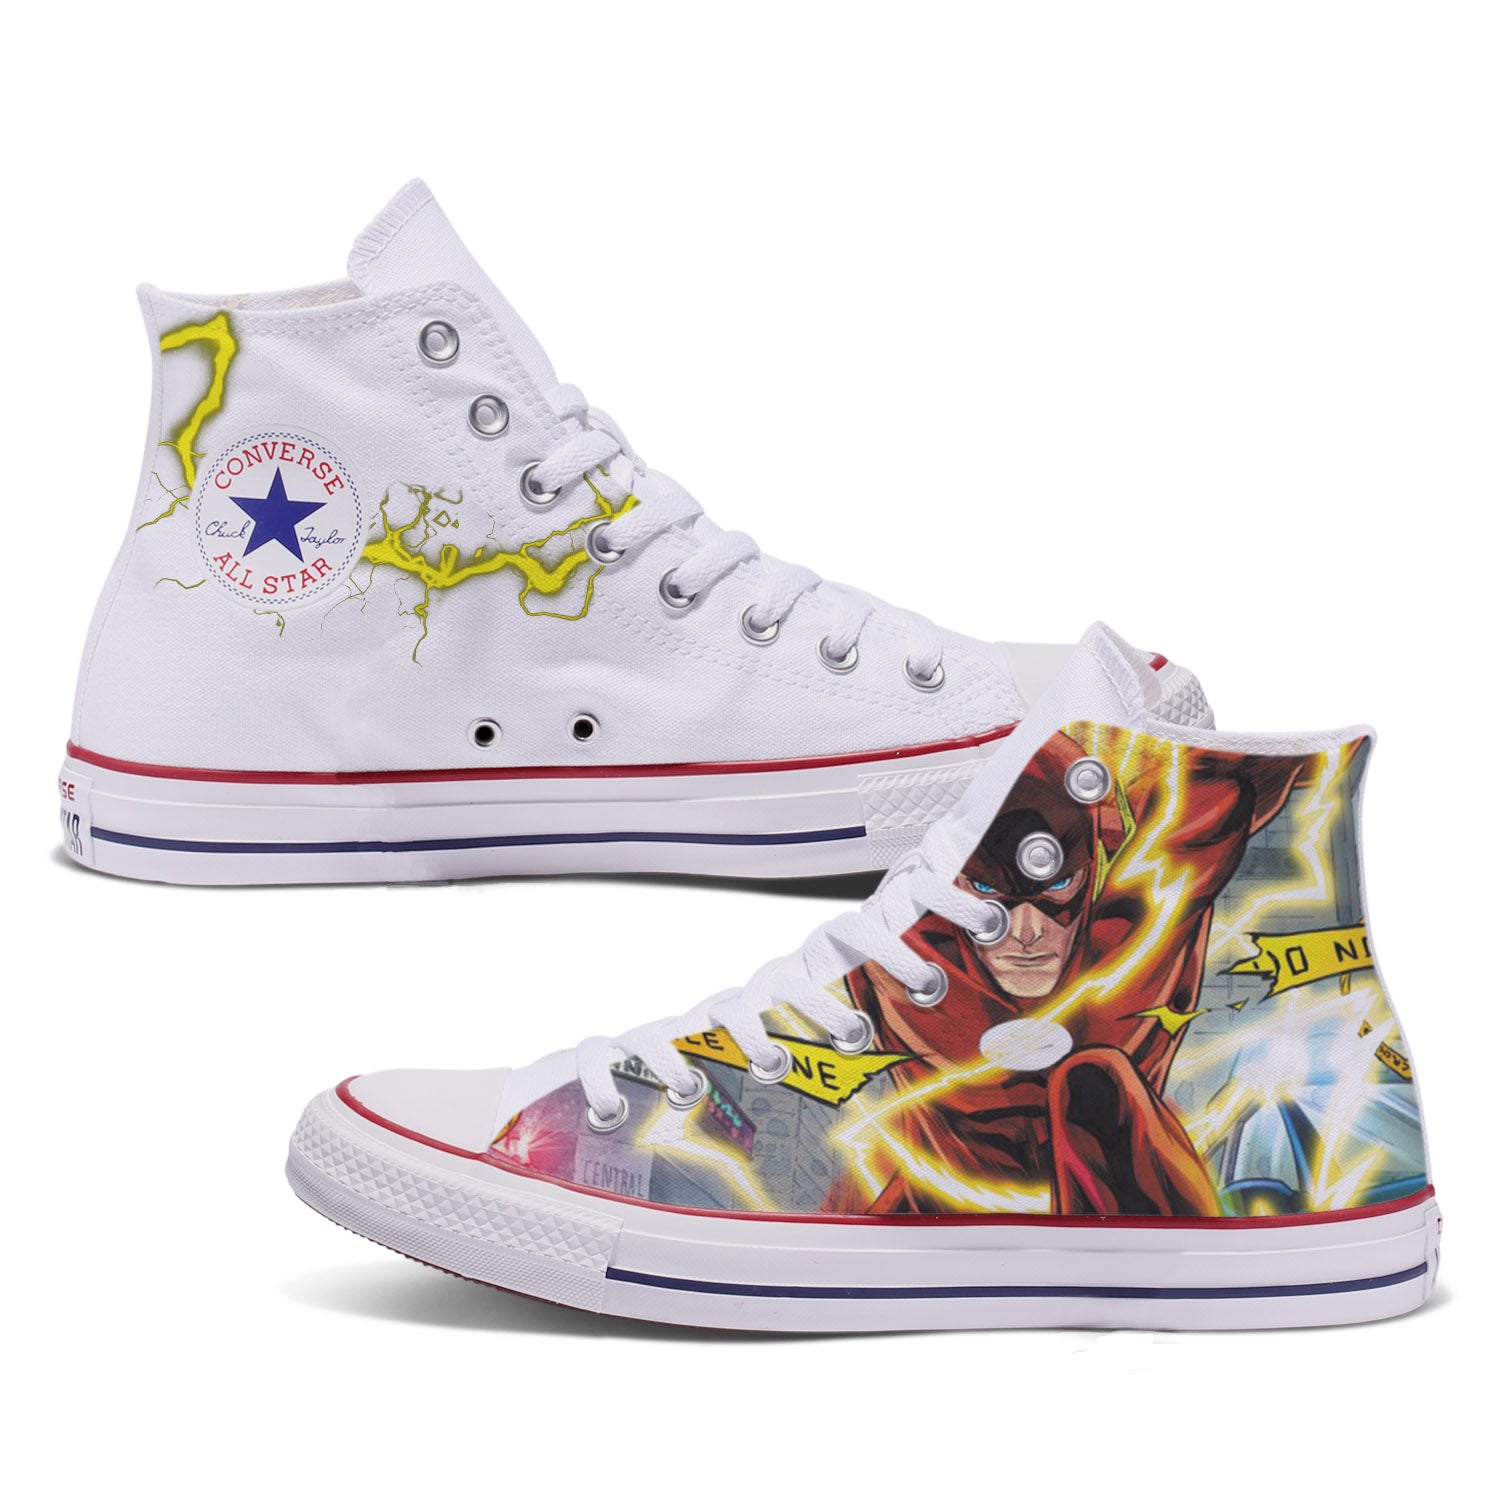 the flash converse sneakers